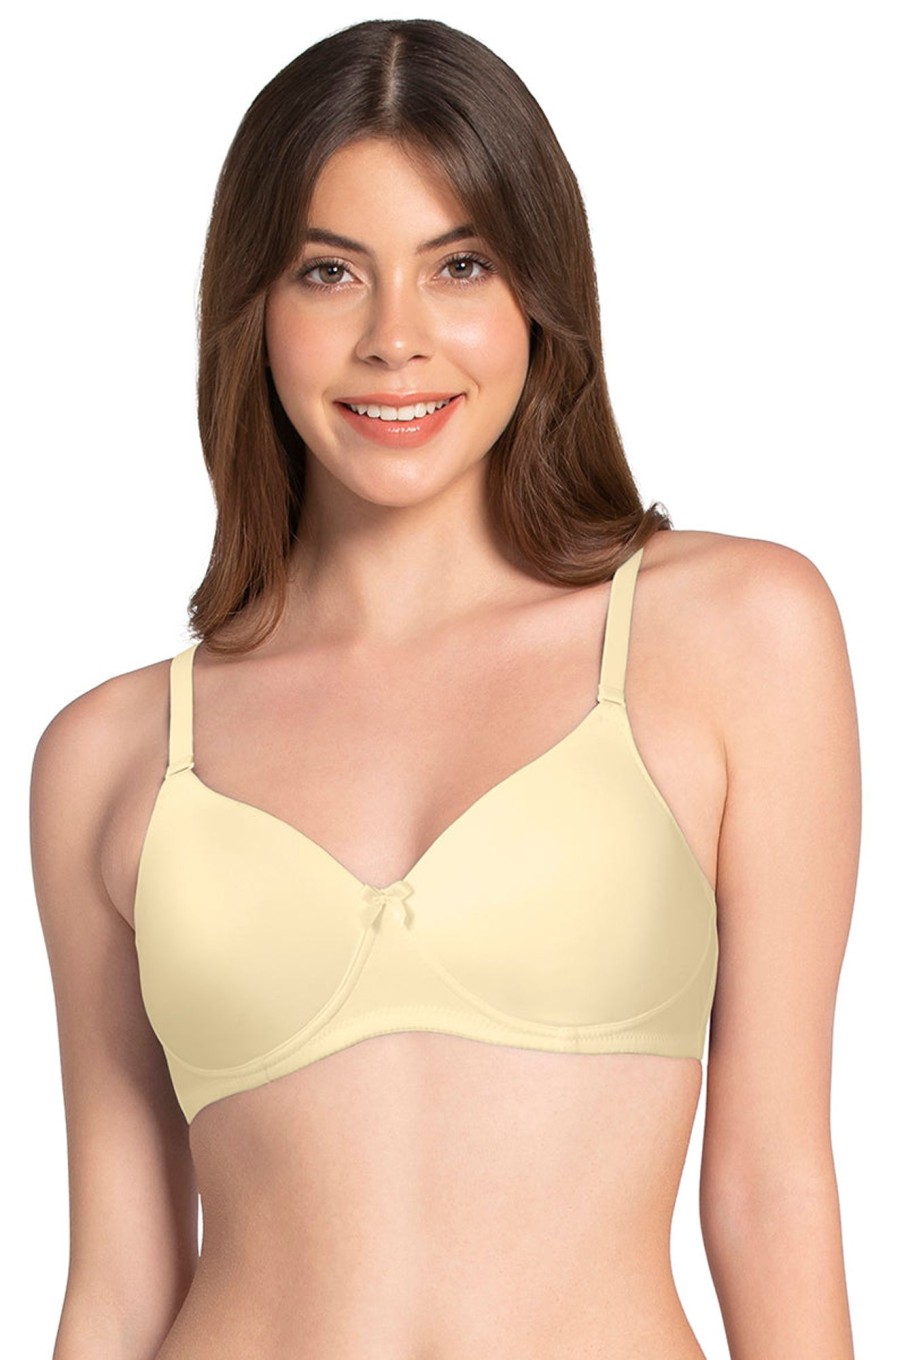 Cotton Casuals Padded Non-Wired Printed T-Shirt Bra - Cotton Bloom